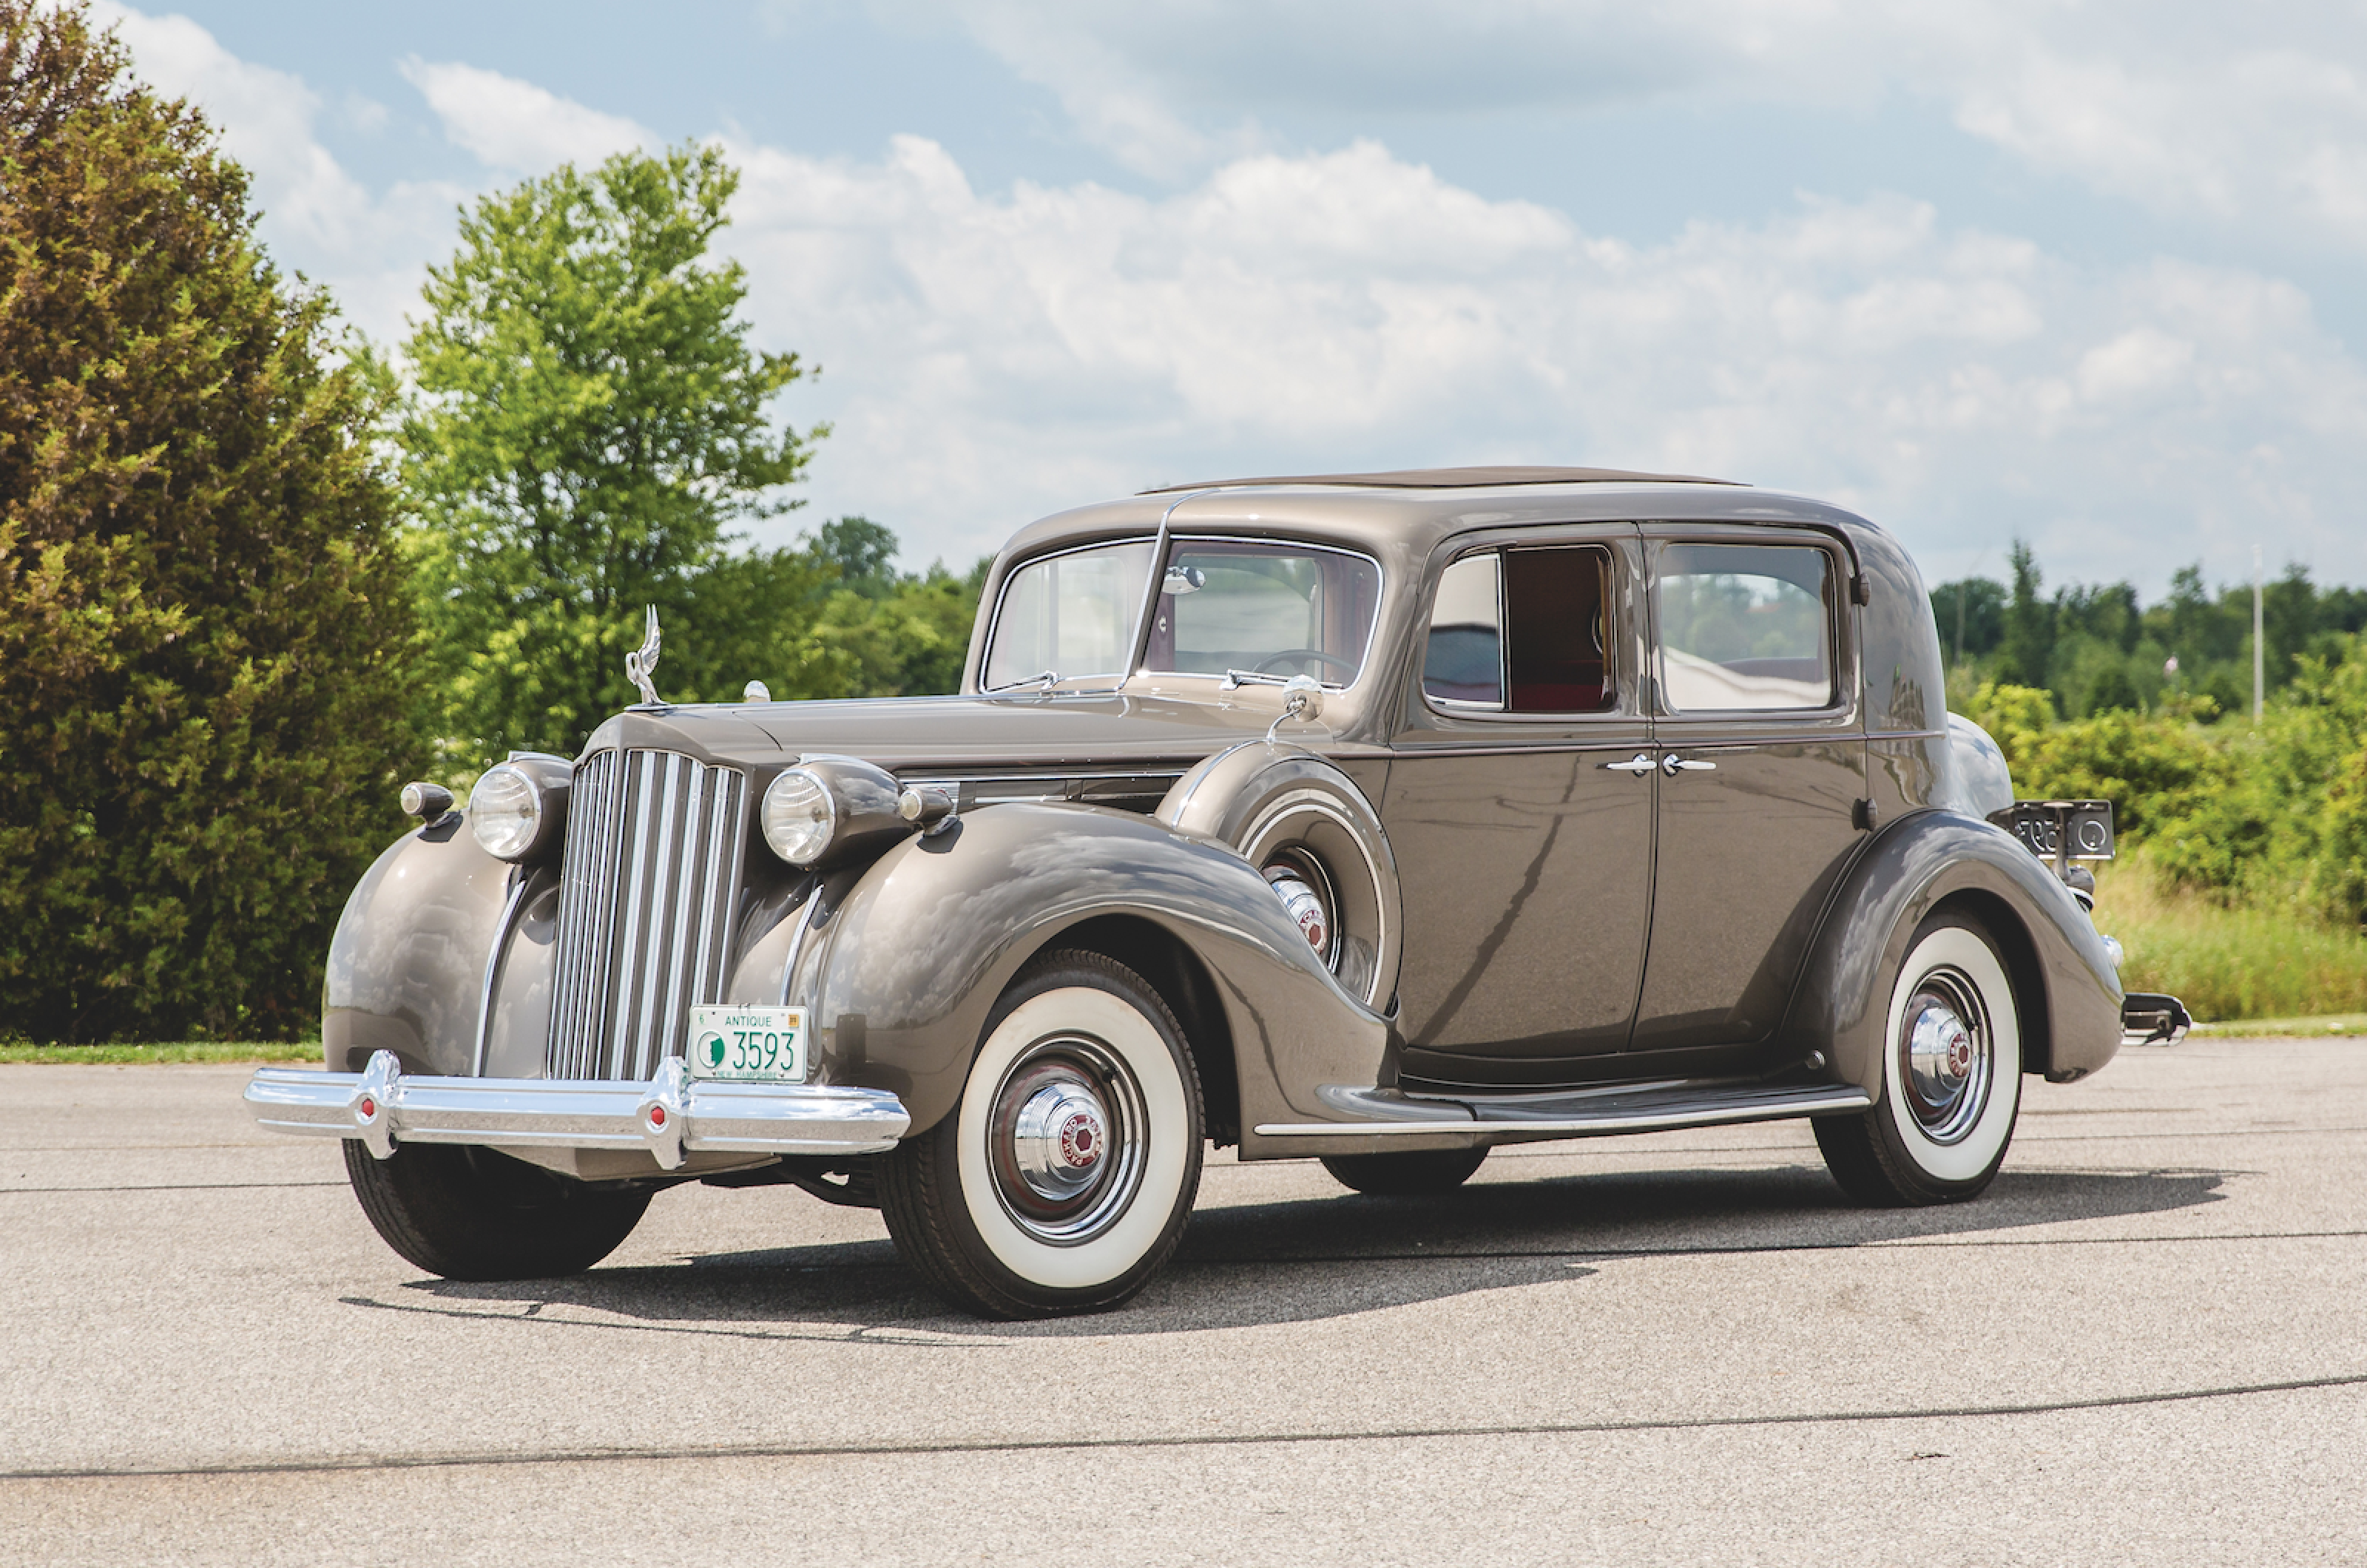 <p>Until the 1990s, only the most expensive British and European cars came with air conditioning, but luxury US marque Packard offered a fairly basic system as early as 1939.</p>